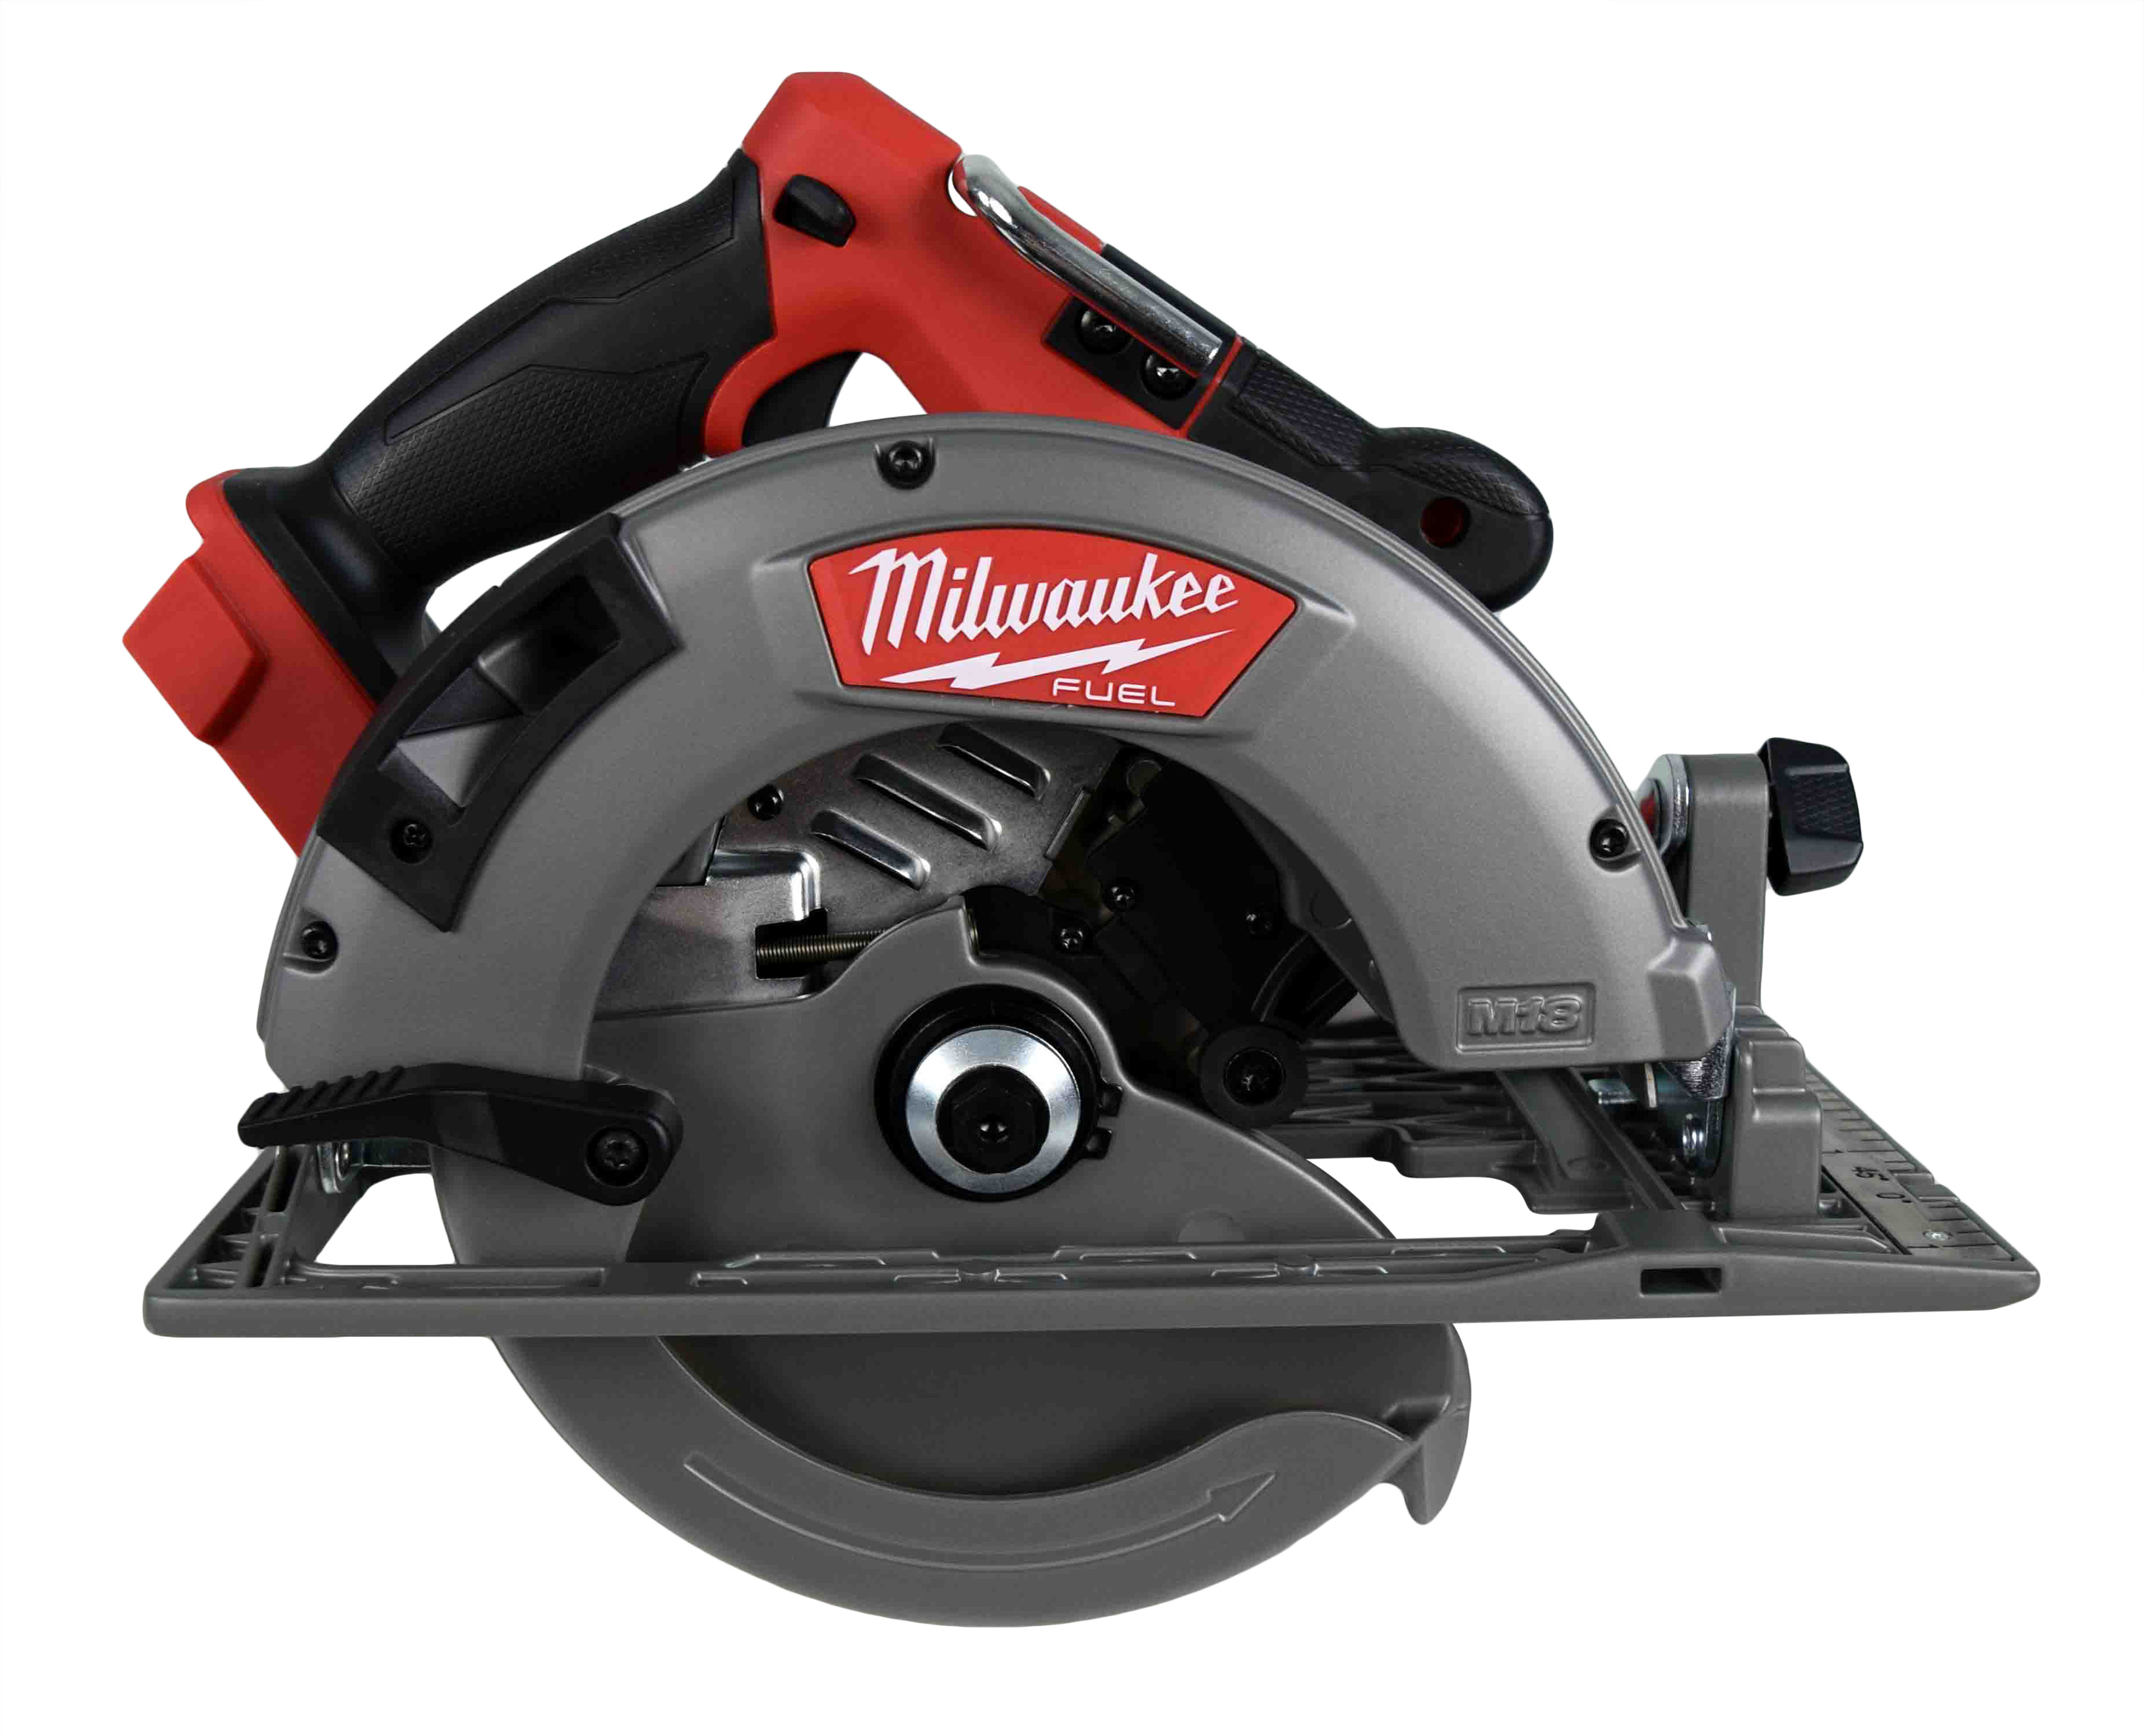 Milwaukee M18 18V Fuel 7-1/4" Circular Saw Kit 2732-21HD with 12Ah Battery, Charger, Contractor Tool Bag - image 3 of 9